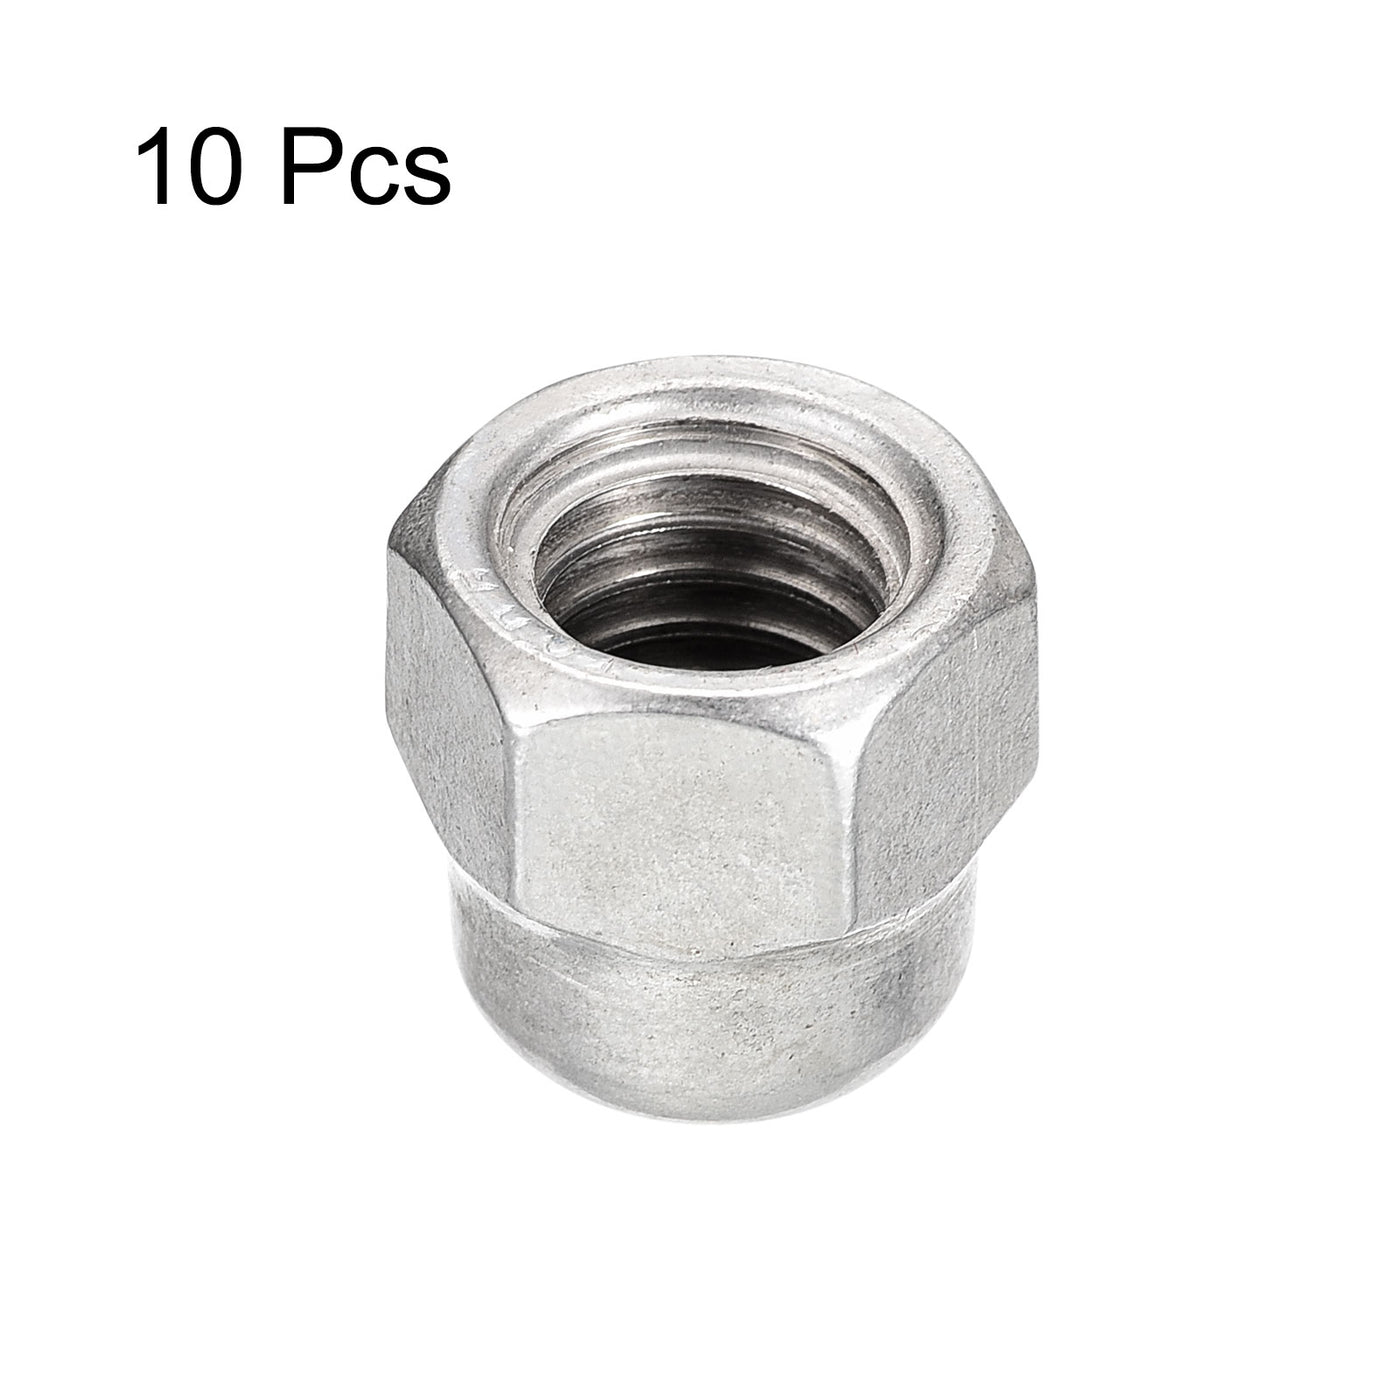 uxcell Uxcell 7/16-14 Acorn Cap Nuts,10pcs - 304 Stainless Steel Hardware Nuts, Acorn Hex Cap Dome Head Nuts for Fasteners (Silver)